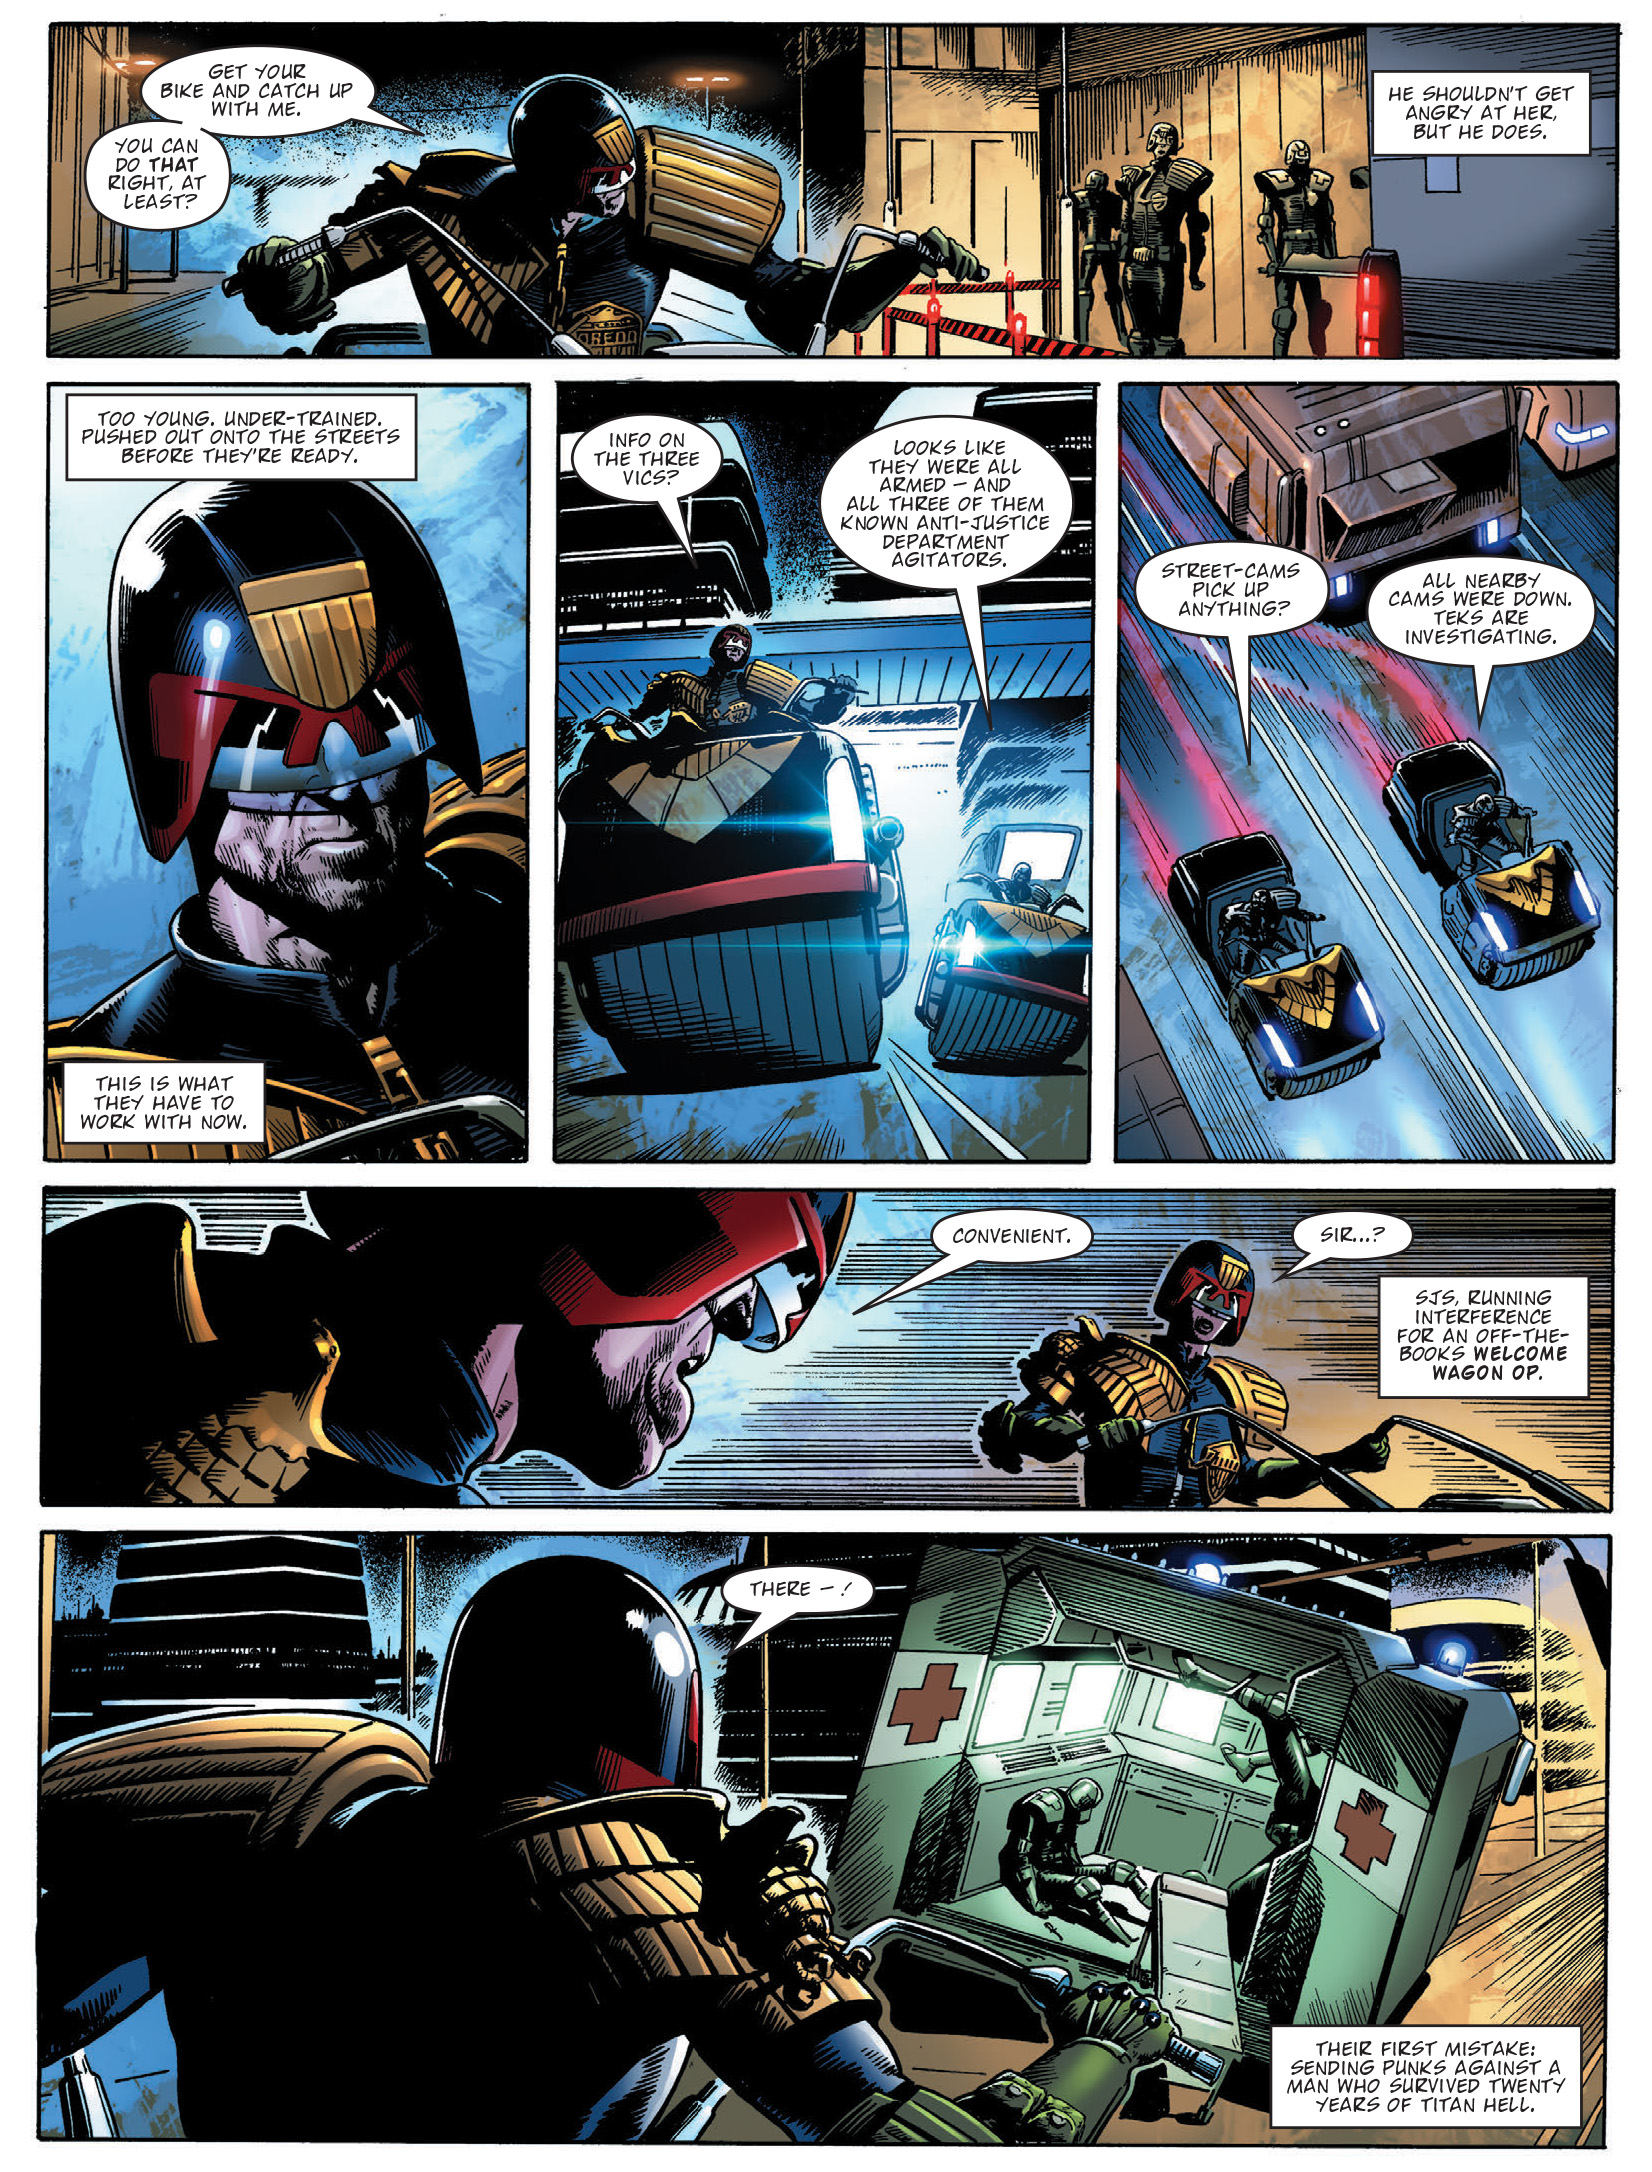 2000 AD: Chapter 2228 - Page 4